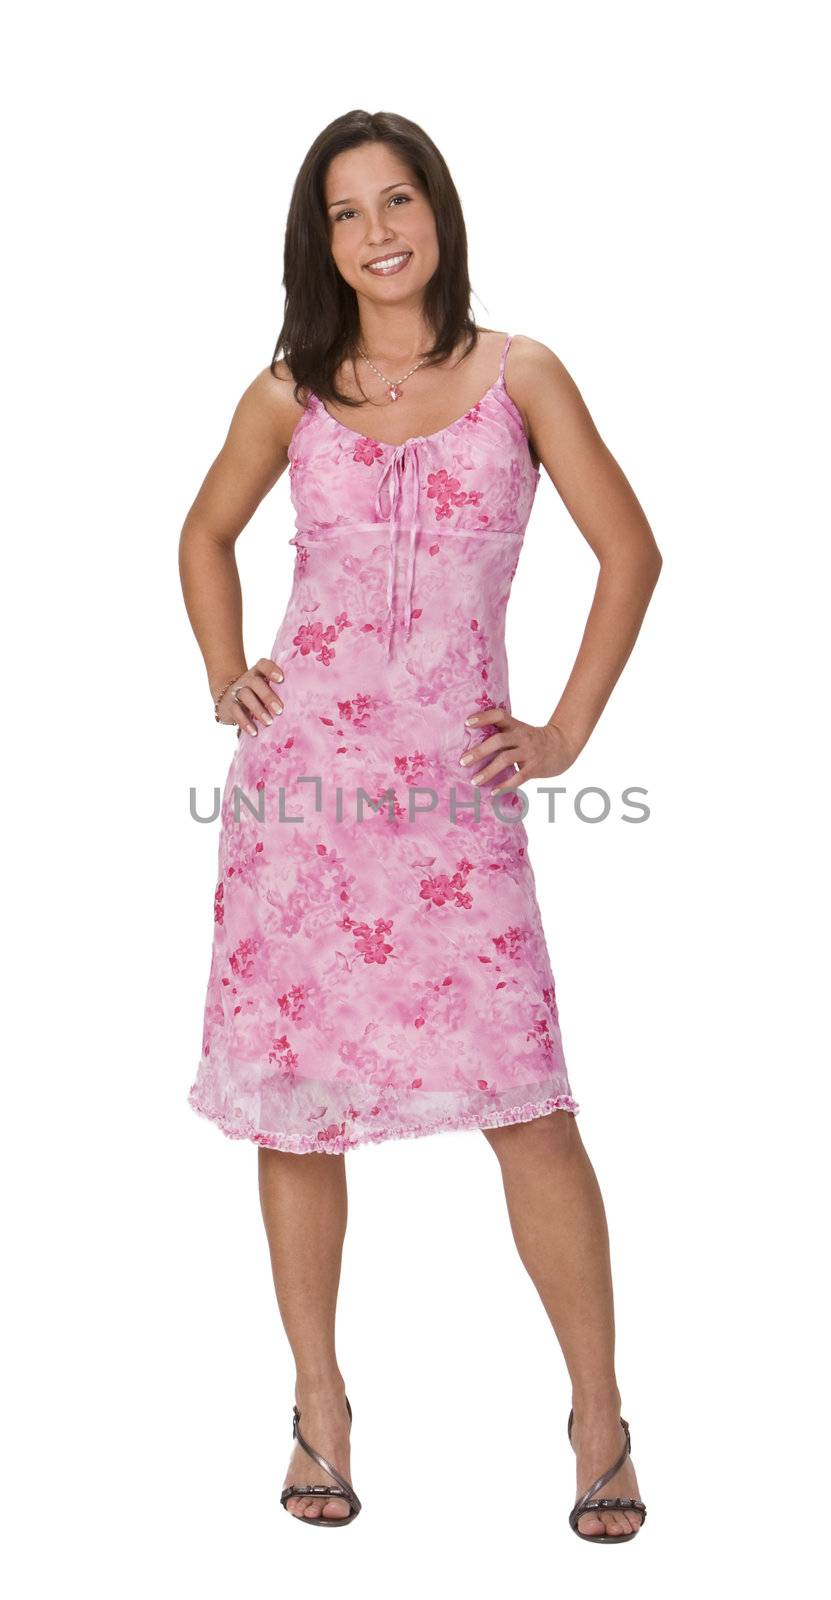 Image of a beautiful young brunette in a pink dress against a white background.